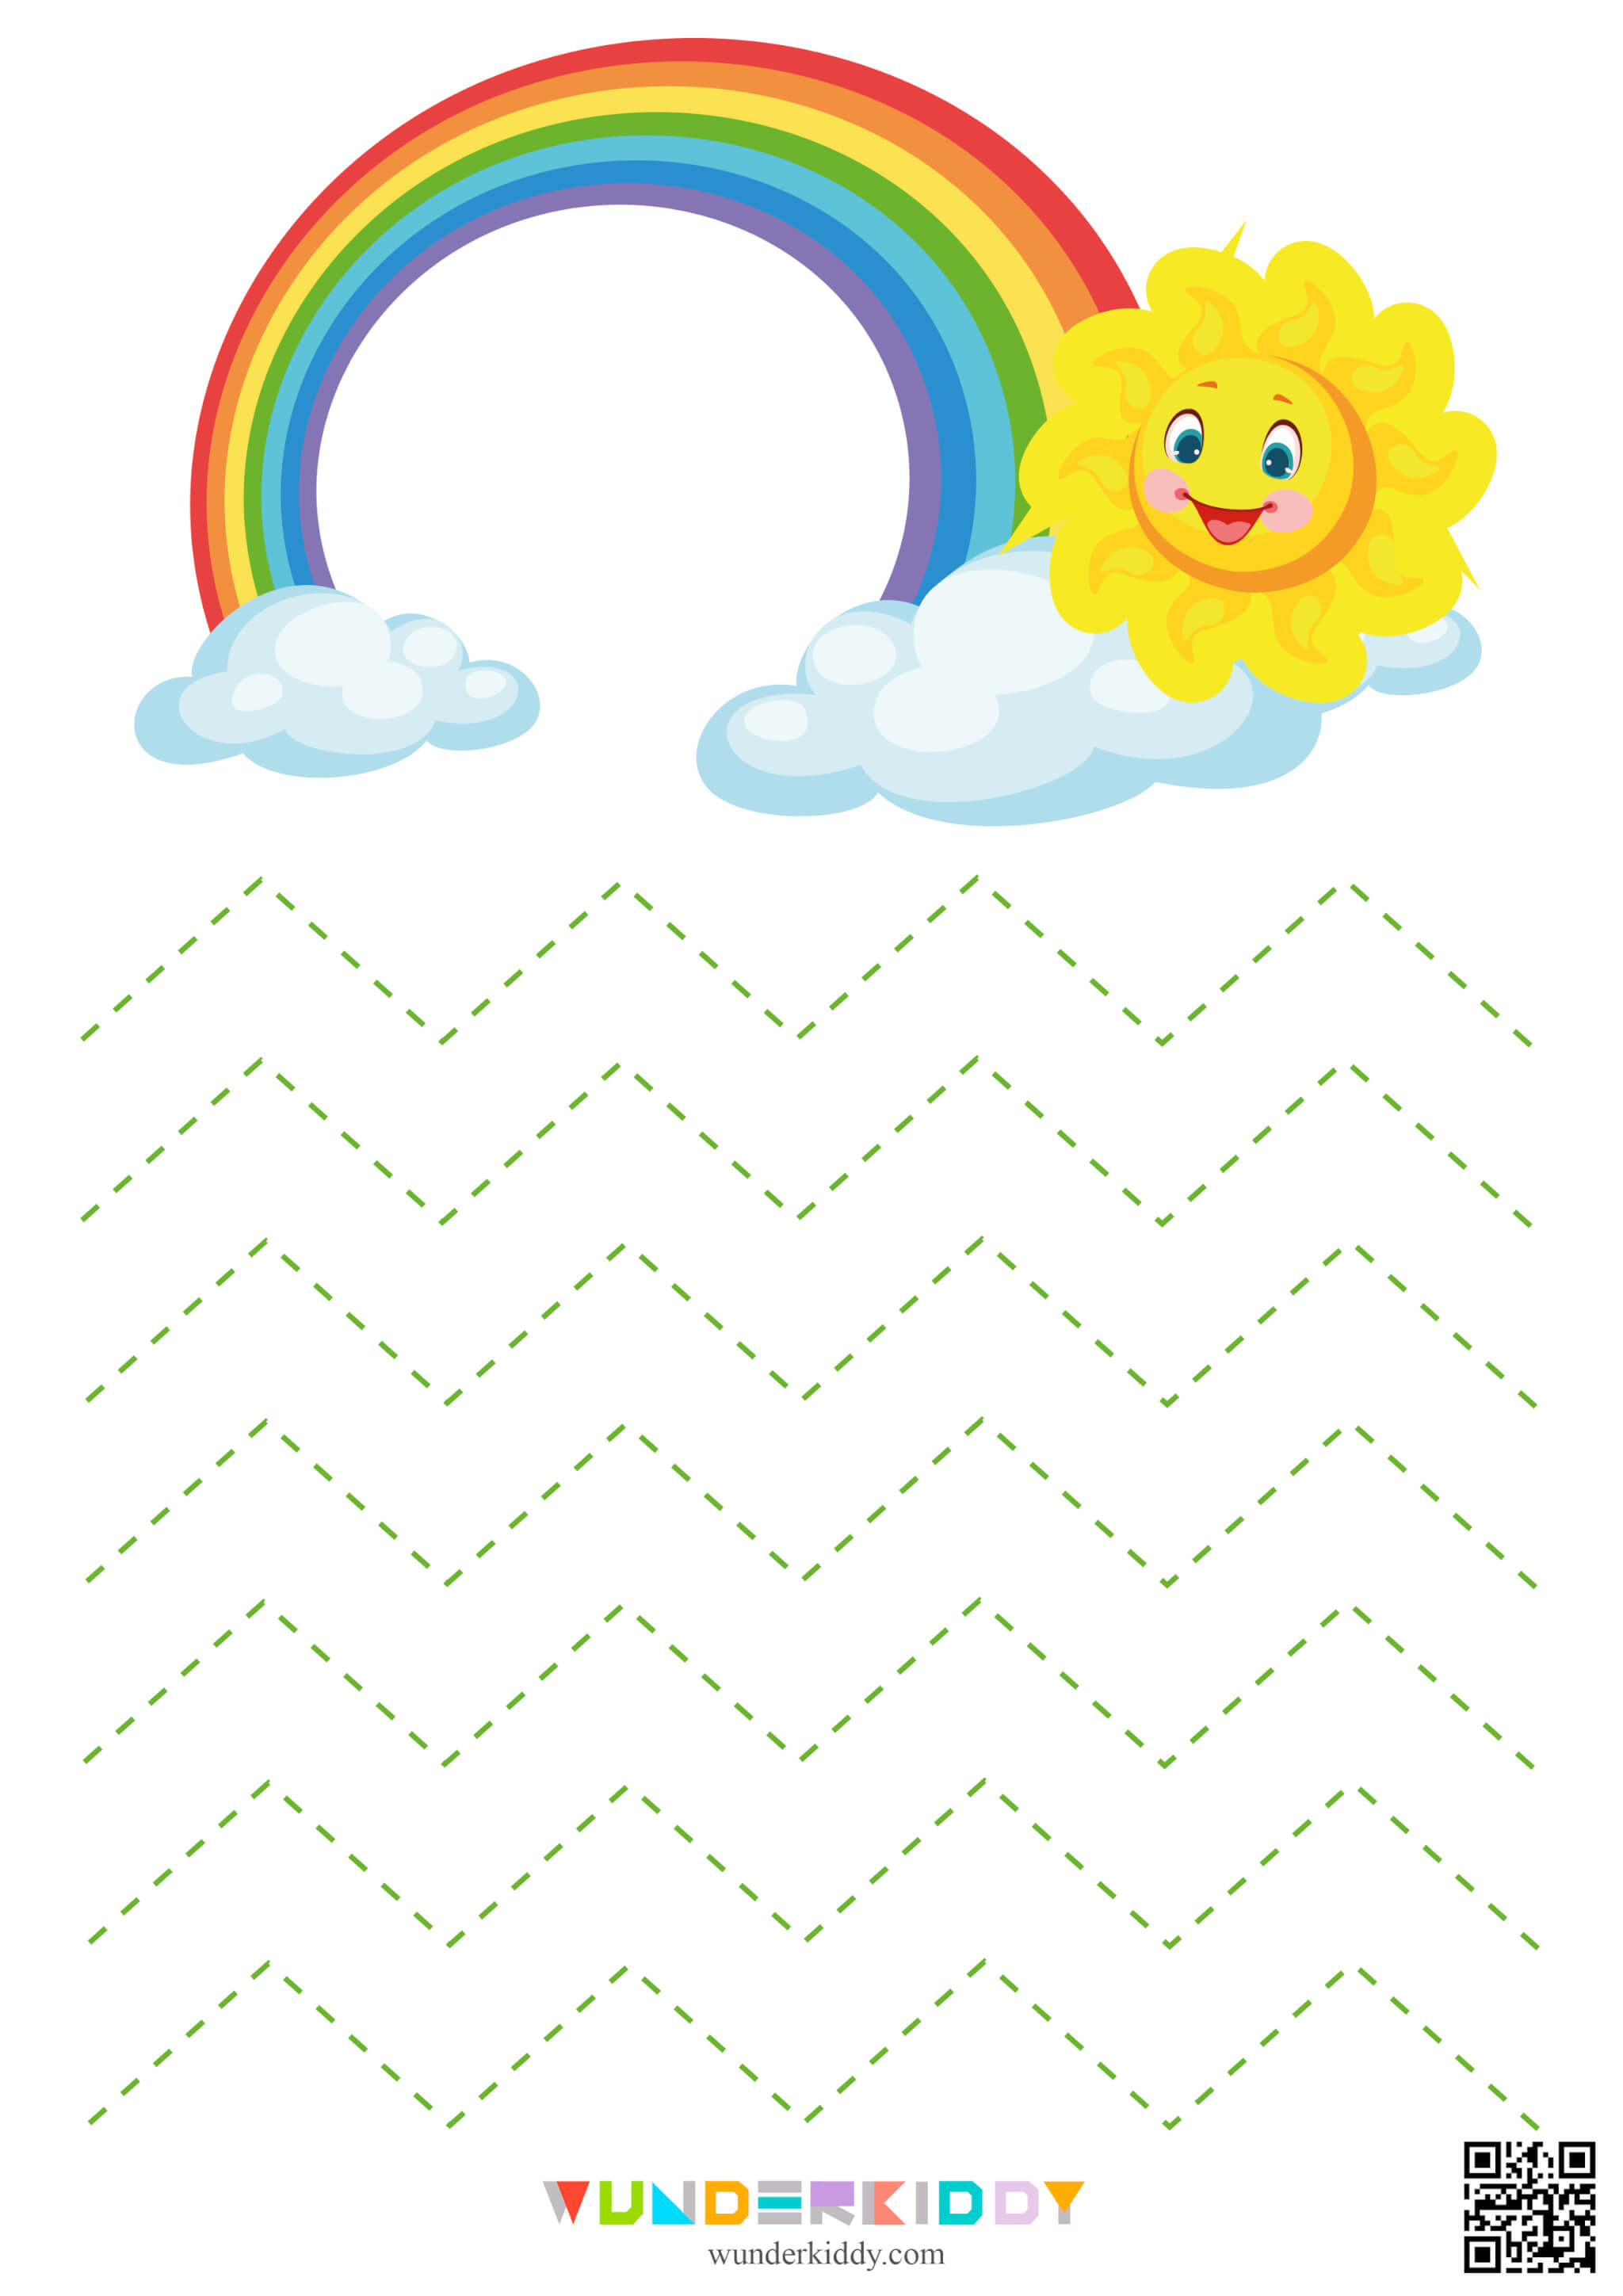 Worksheet for Pre-writing Practice Sun and Rainbow - Image 4